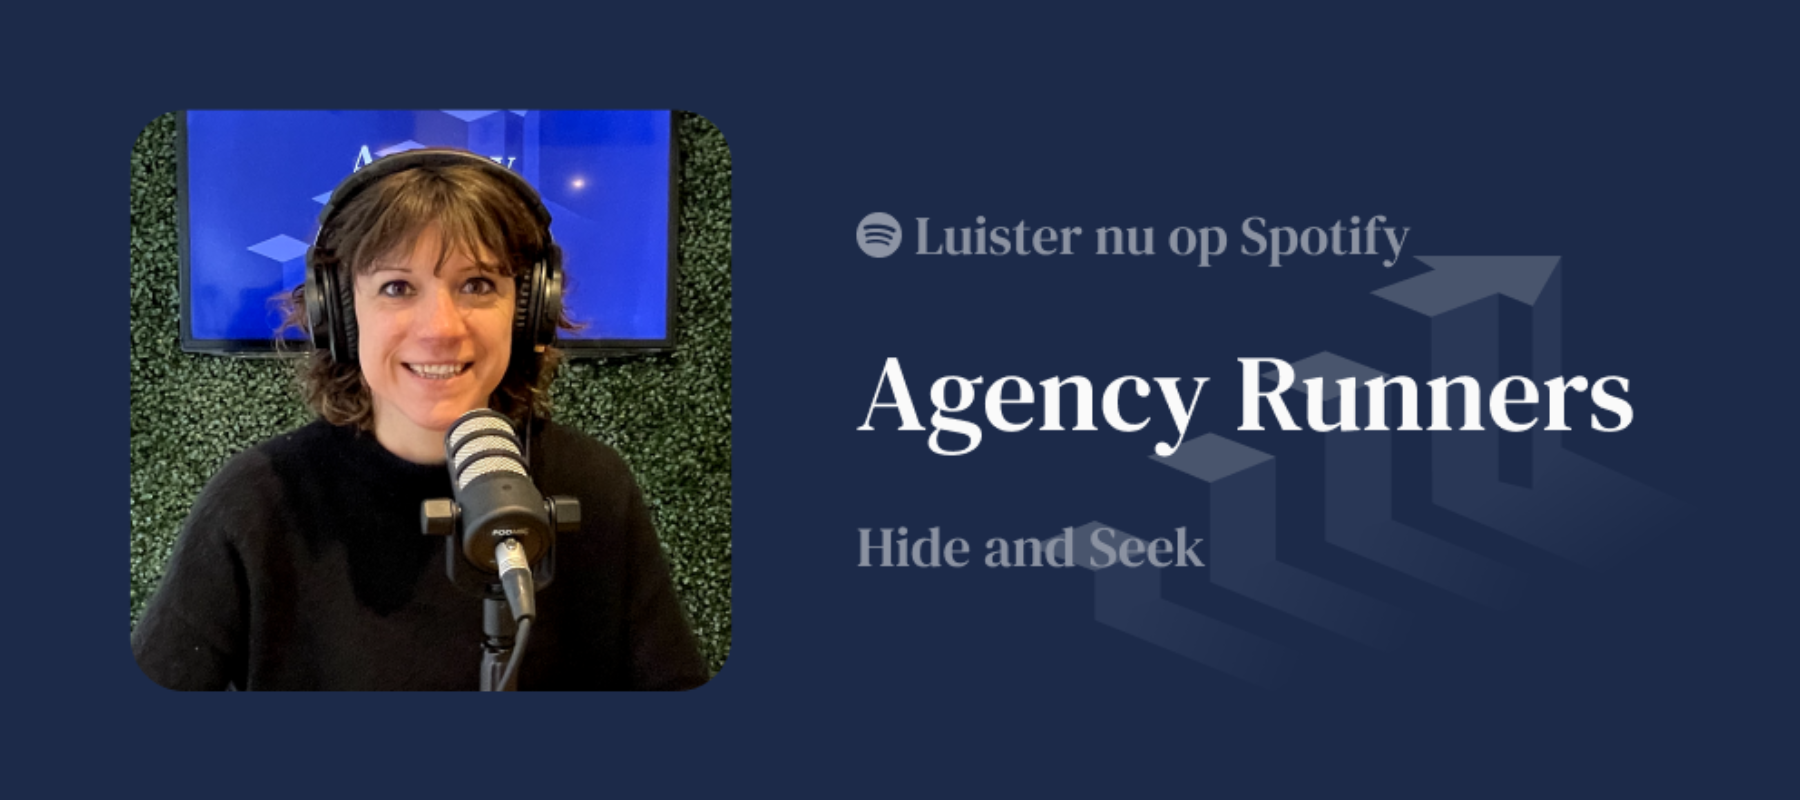 [Podcast] Agency Runners: Sabine Roex over Hide and Seek